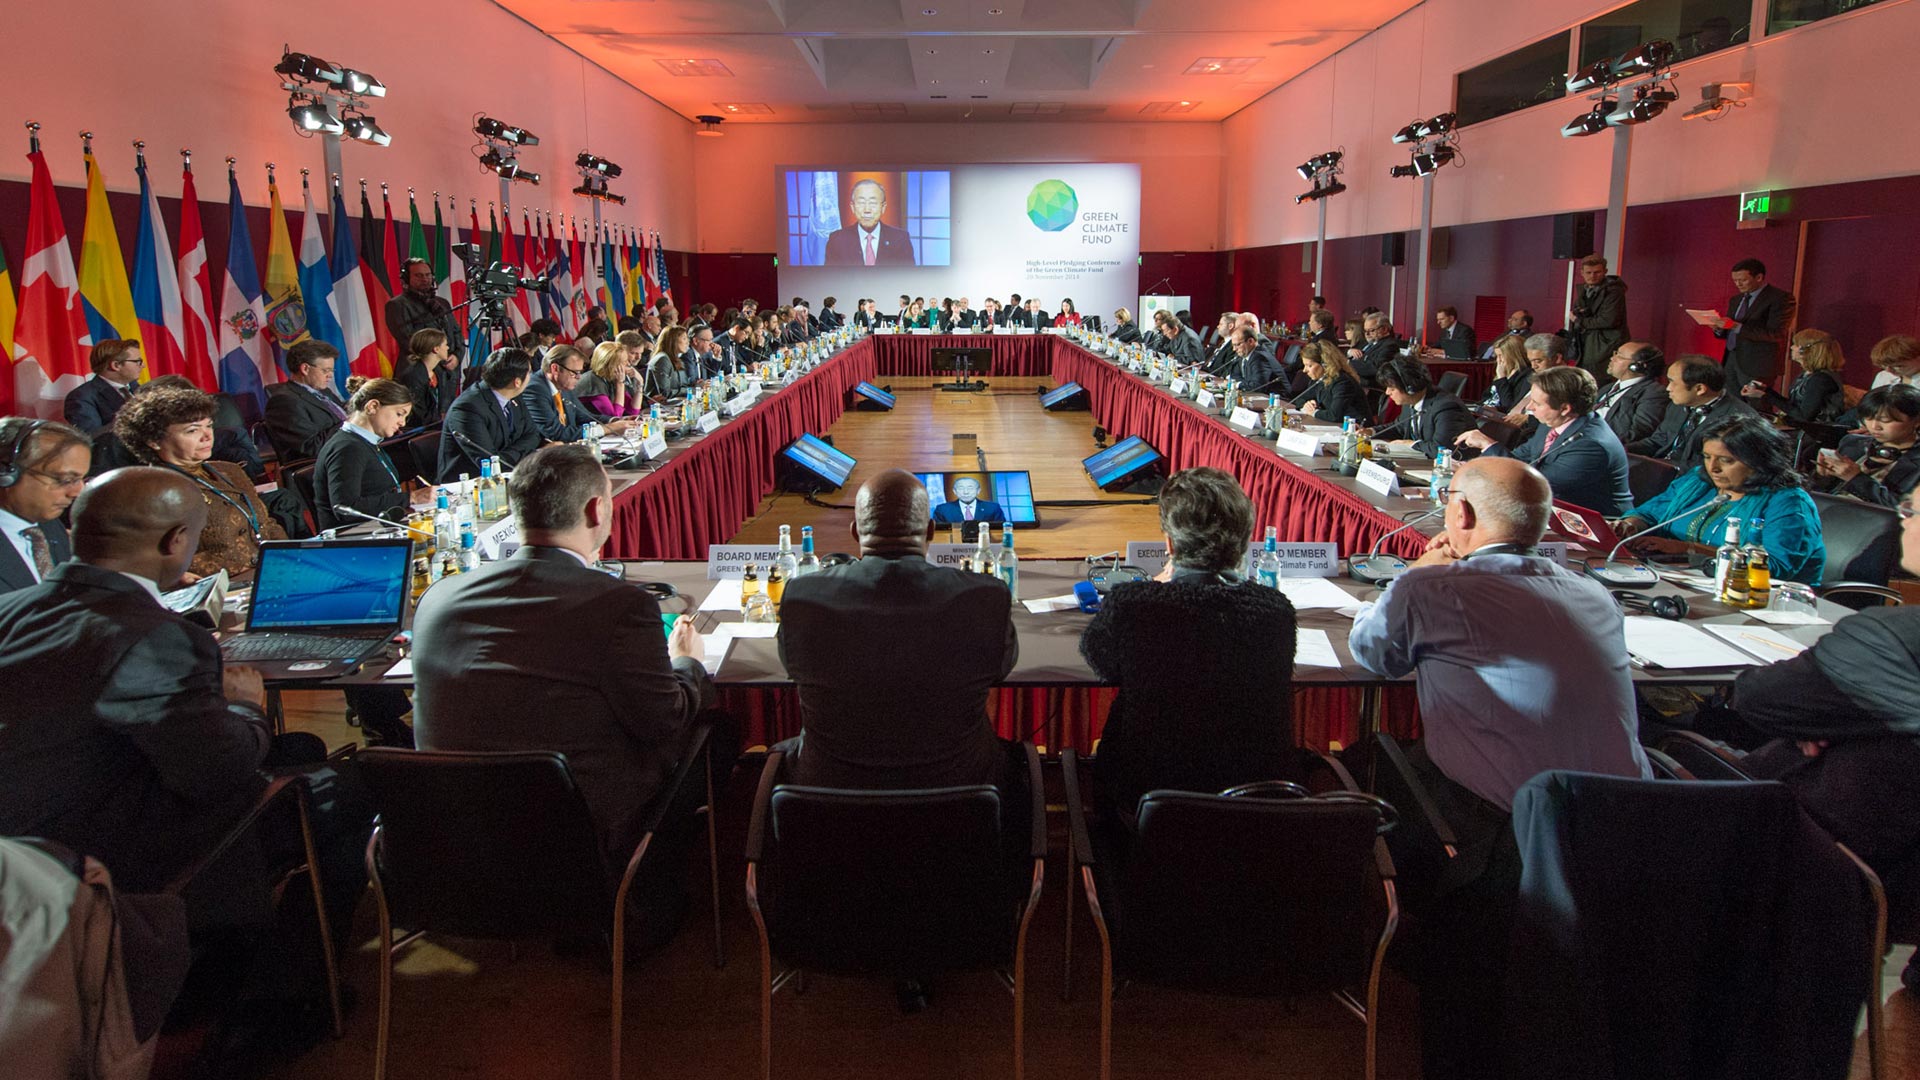 Meeting room of the international donor conference of the Green Climate Fund, hosted by the German government in Berlin on 20 November 2014.